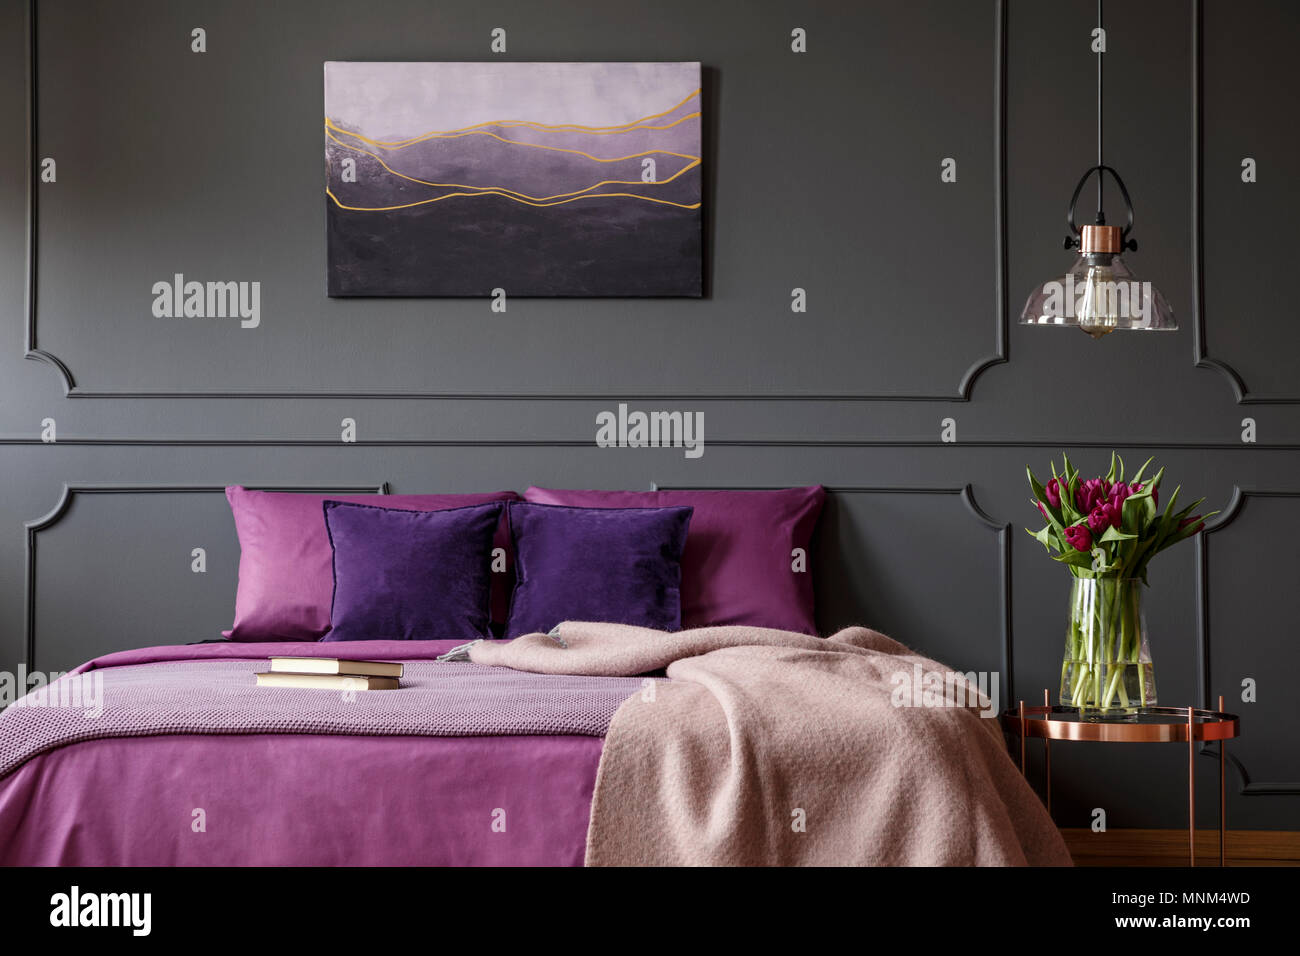 Blanket on purple bed next to table with flowers in bedroom interior with poster on grey wall Stock Photo